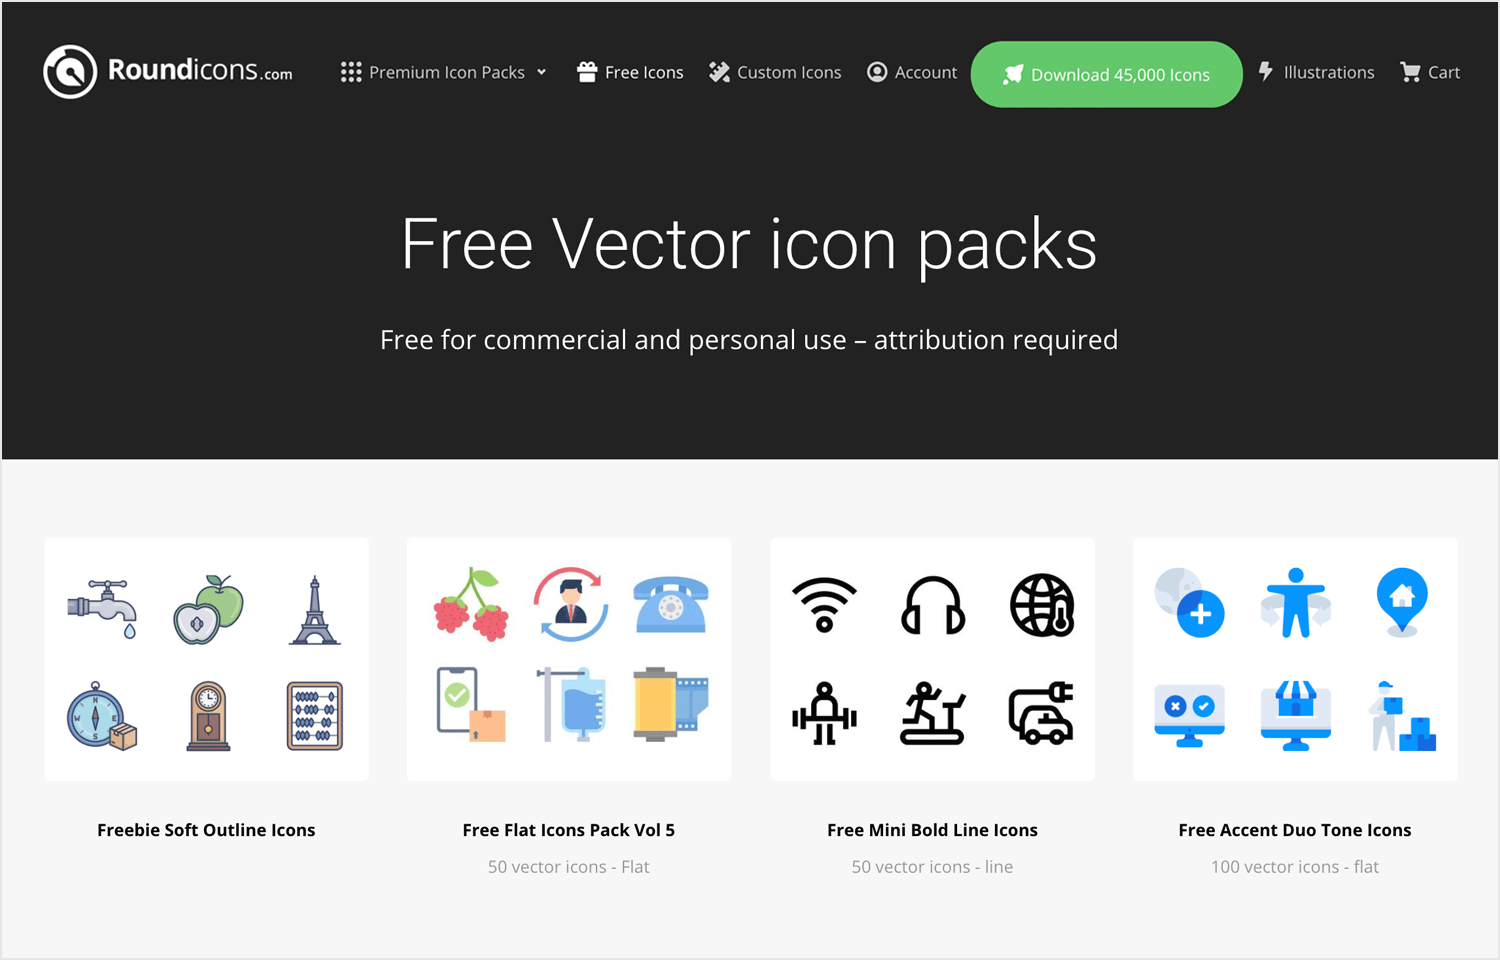 Free app icons to download - Roundicons